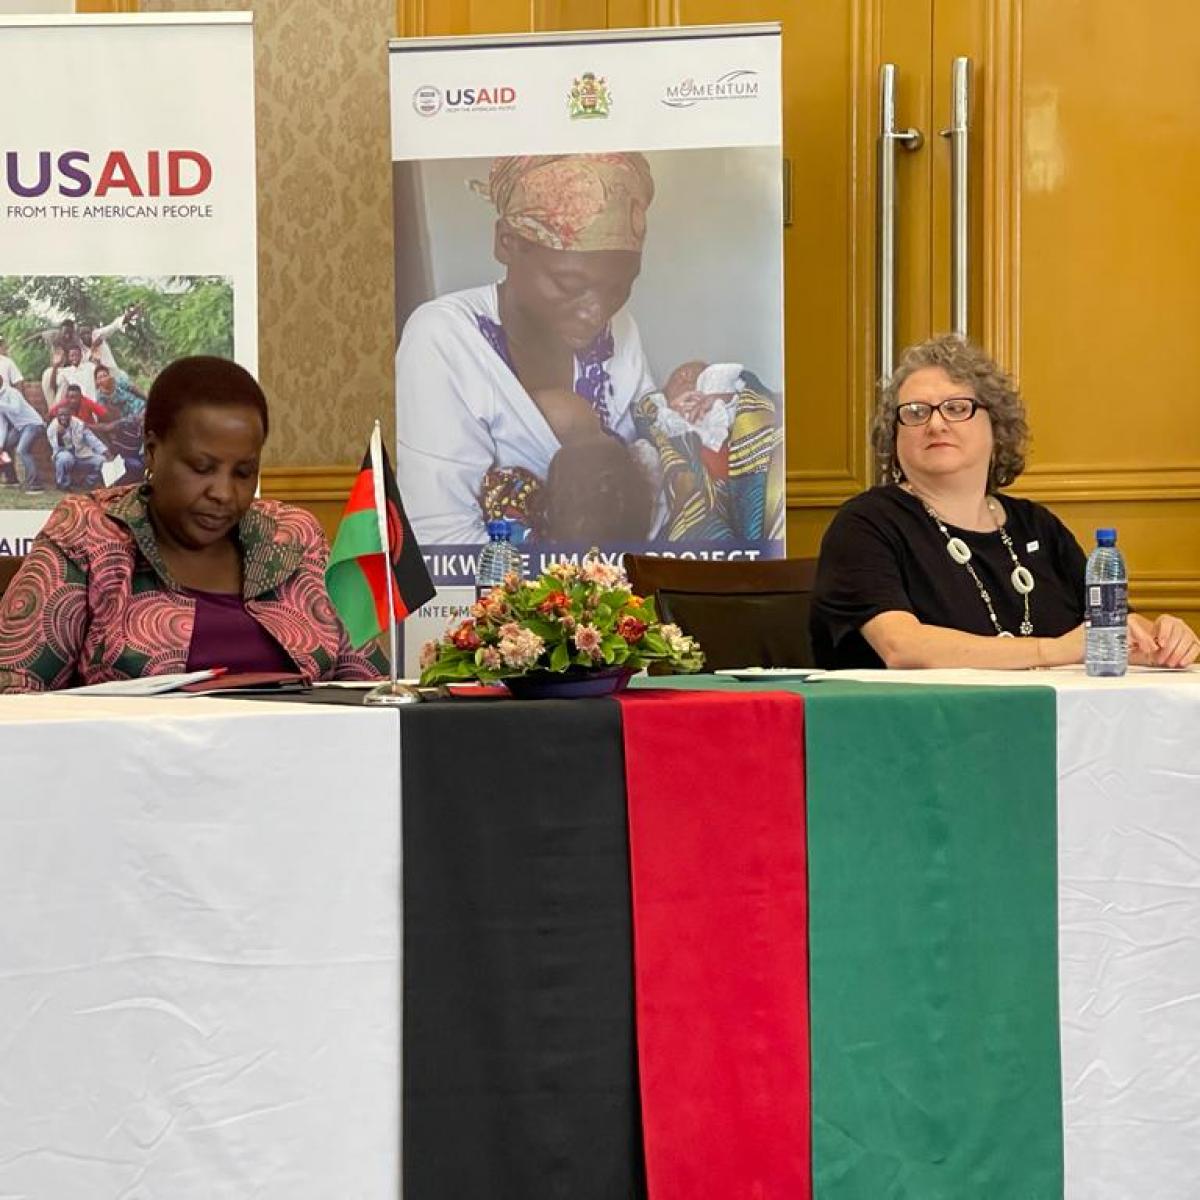 Minister of Health Khumbize Chiponda and USAID Acting Mission Director Natalie Thurnberg at the launch event